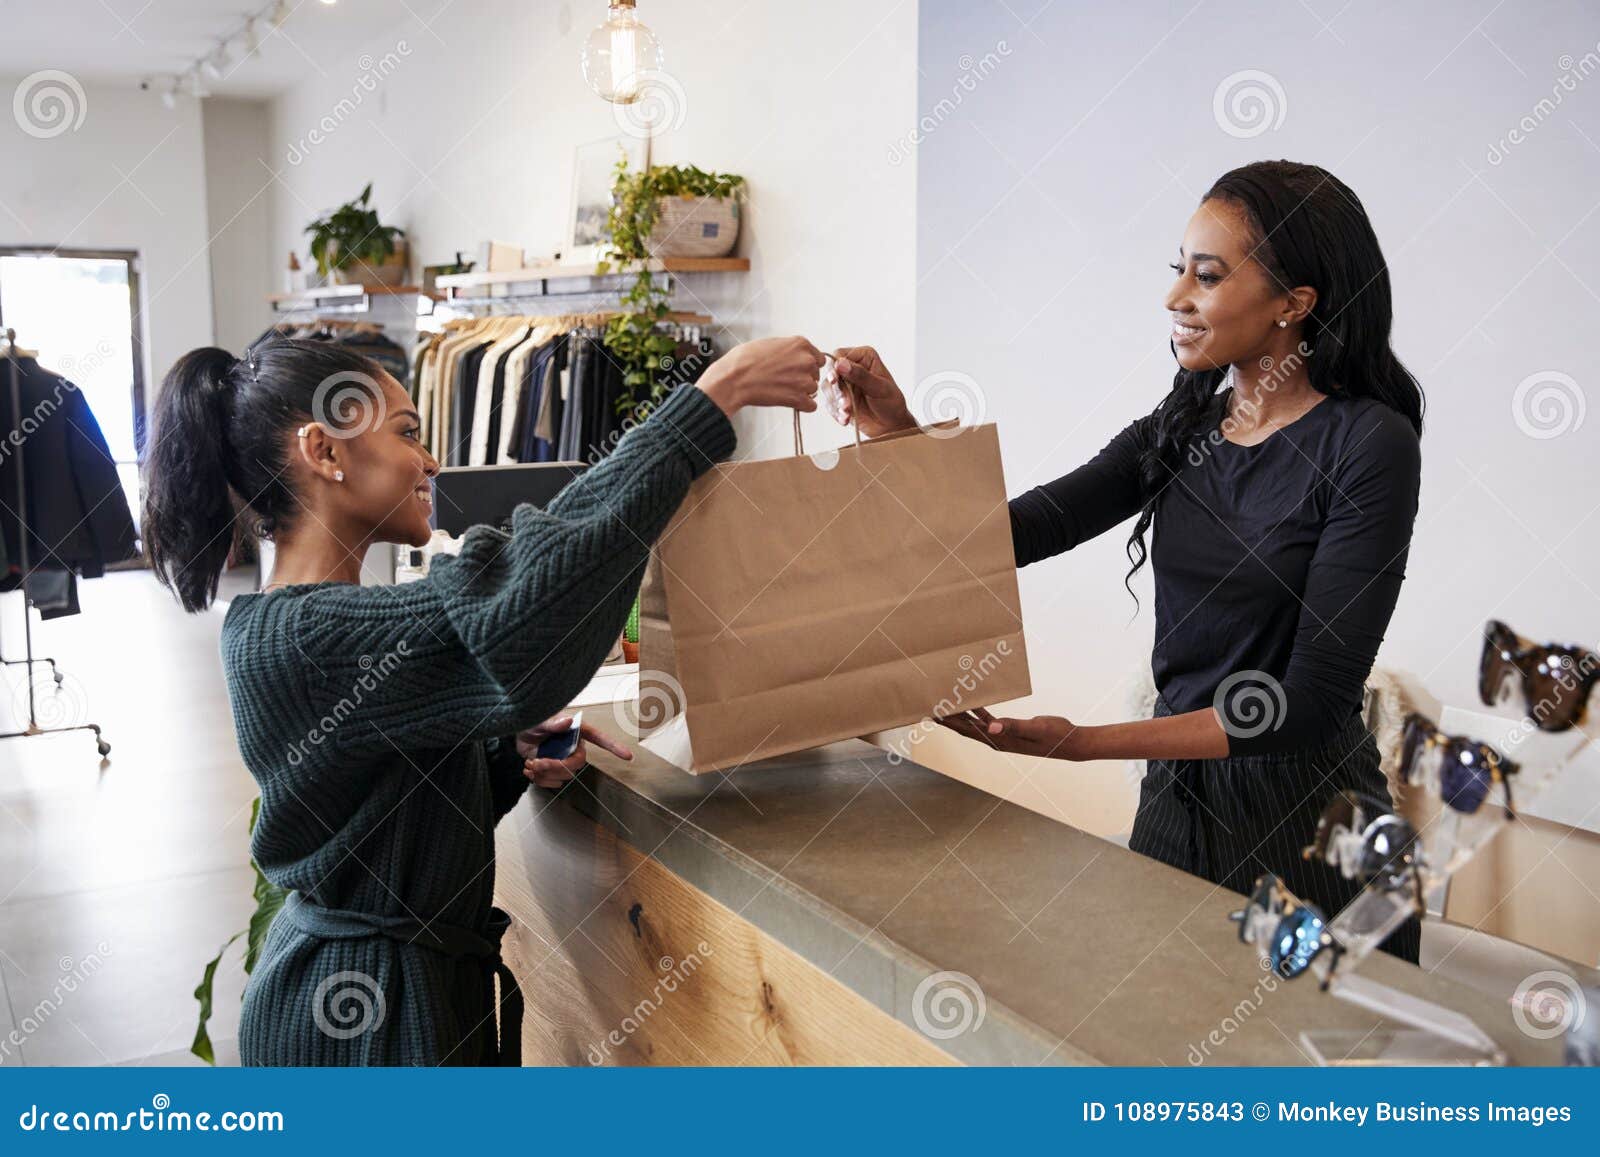 woman serving customer at the counter in a clothing store